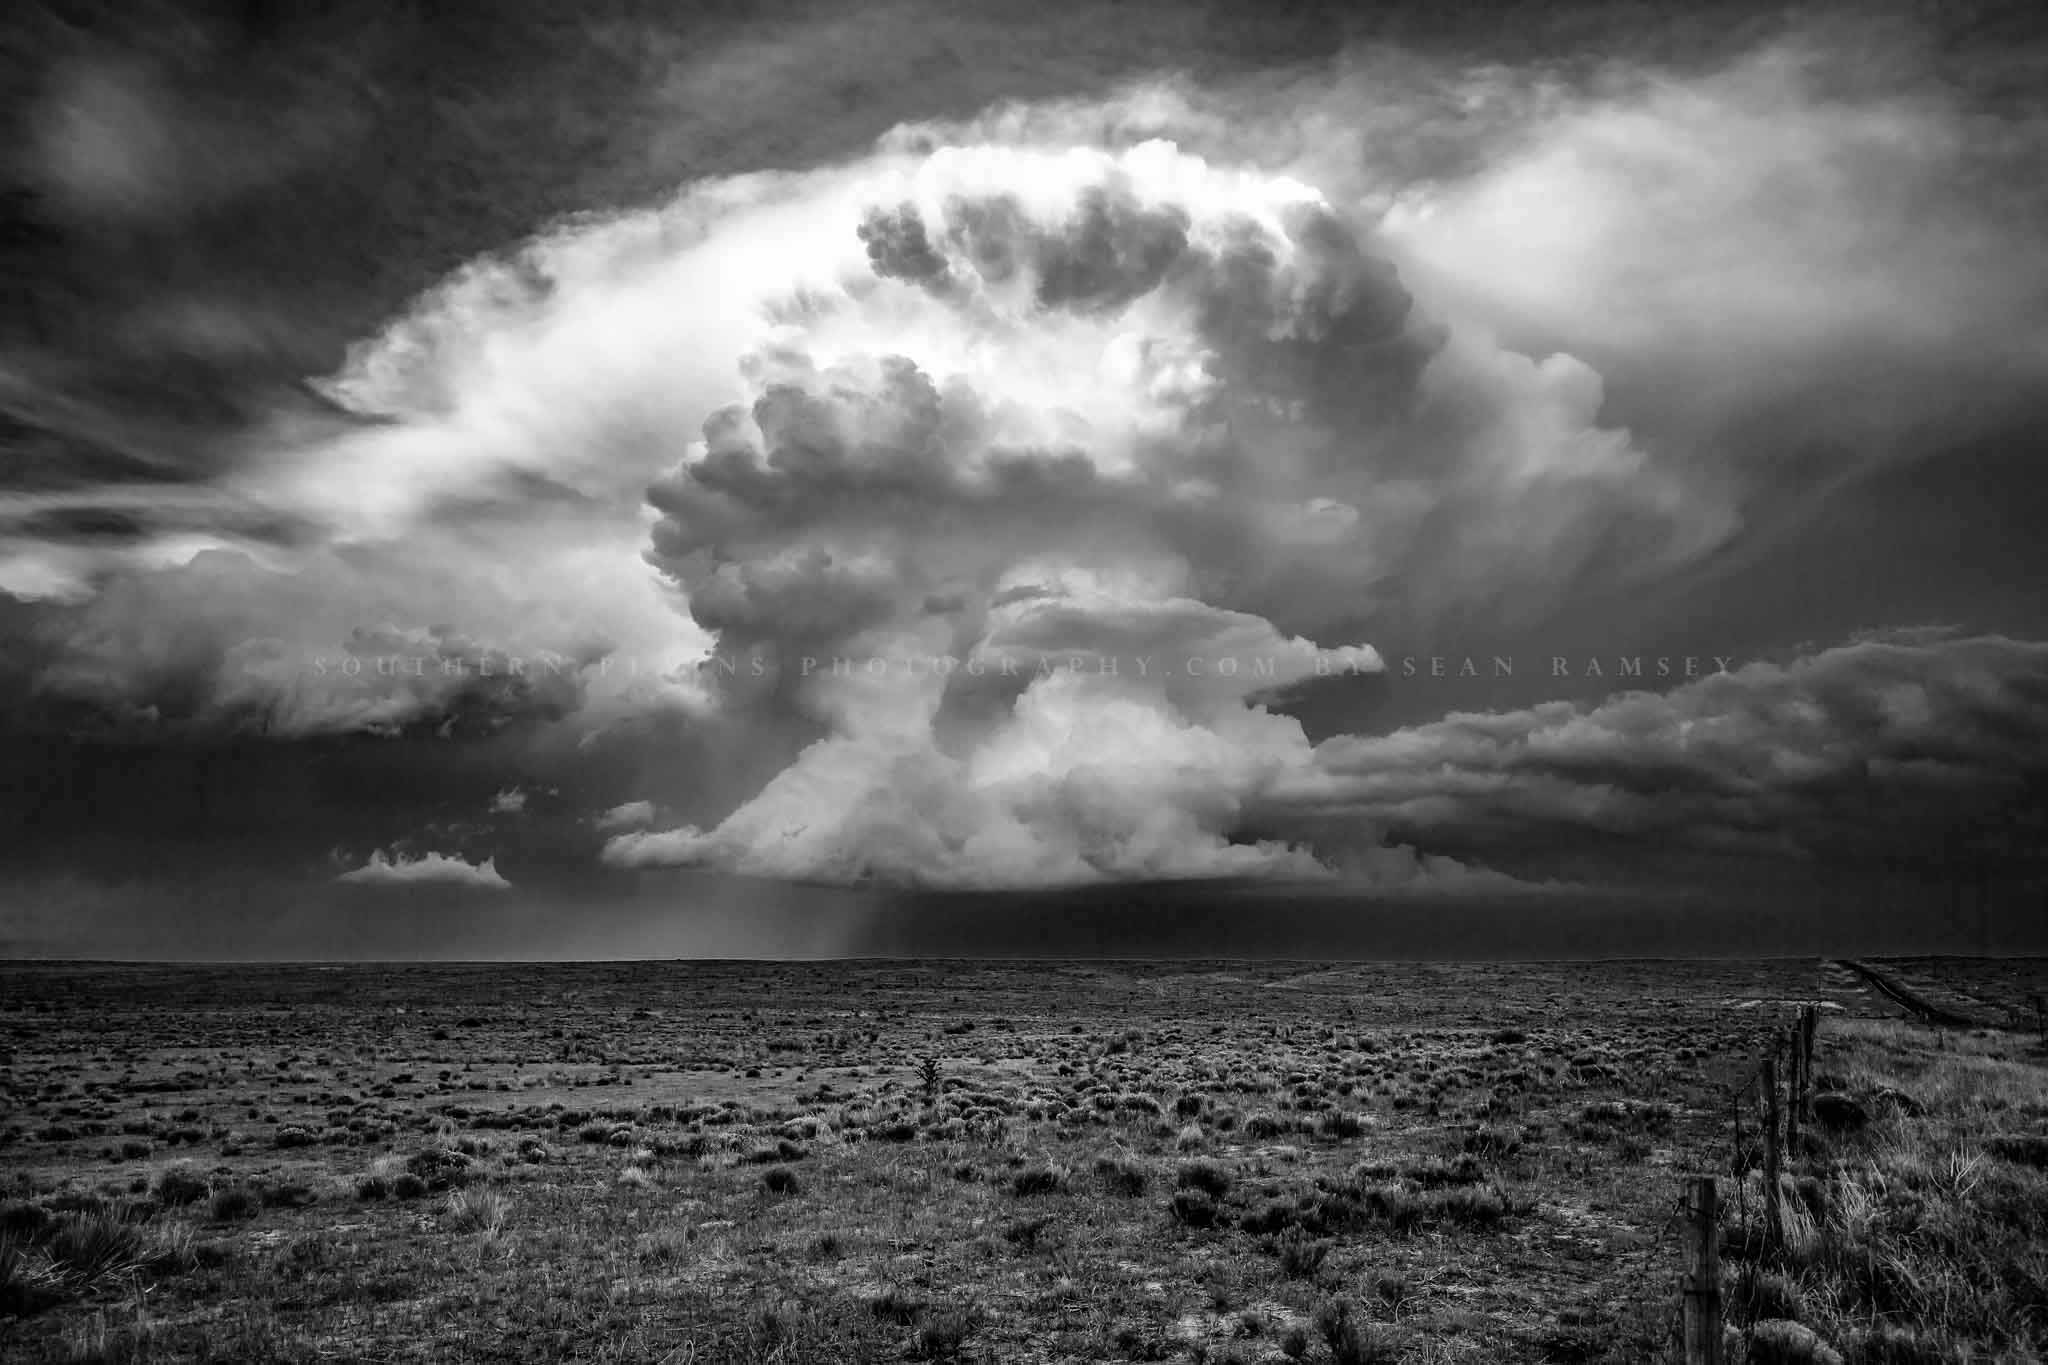 Black and white storm photography print of a supercell thunderstorm climbing high into the sky over the high plains of the Oklahoma panhandle in black and white by Sean Ramsey of Southern Plains Photography.